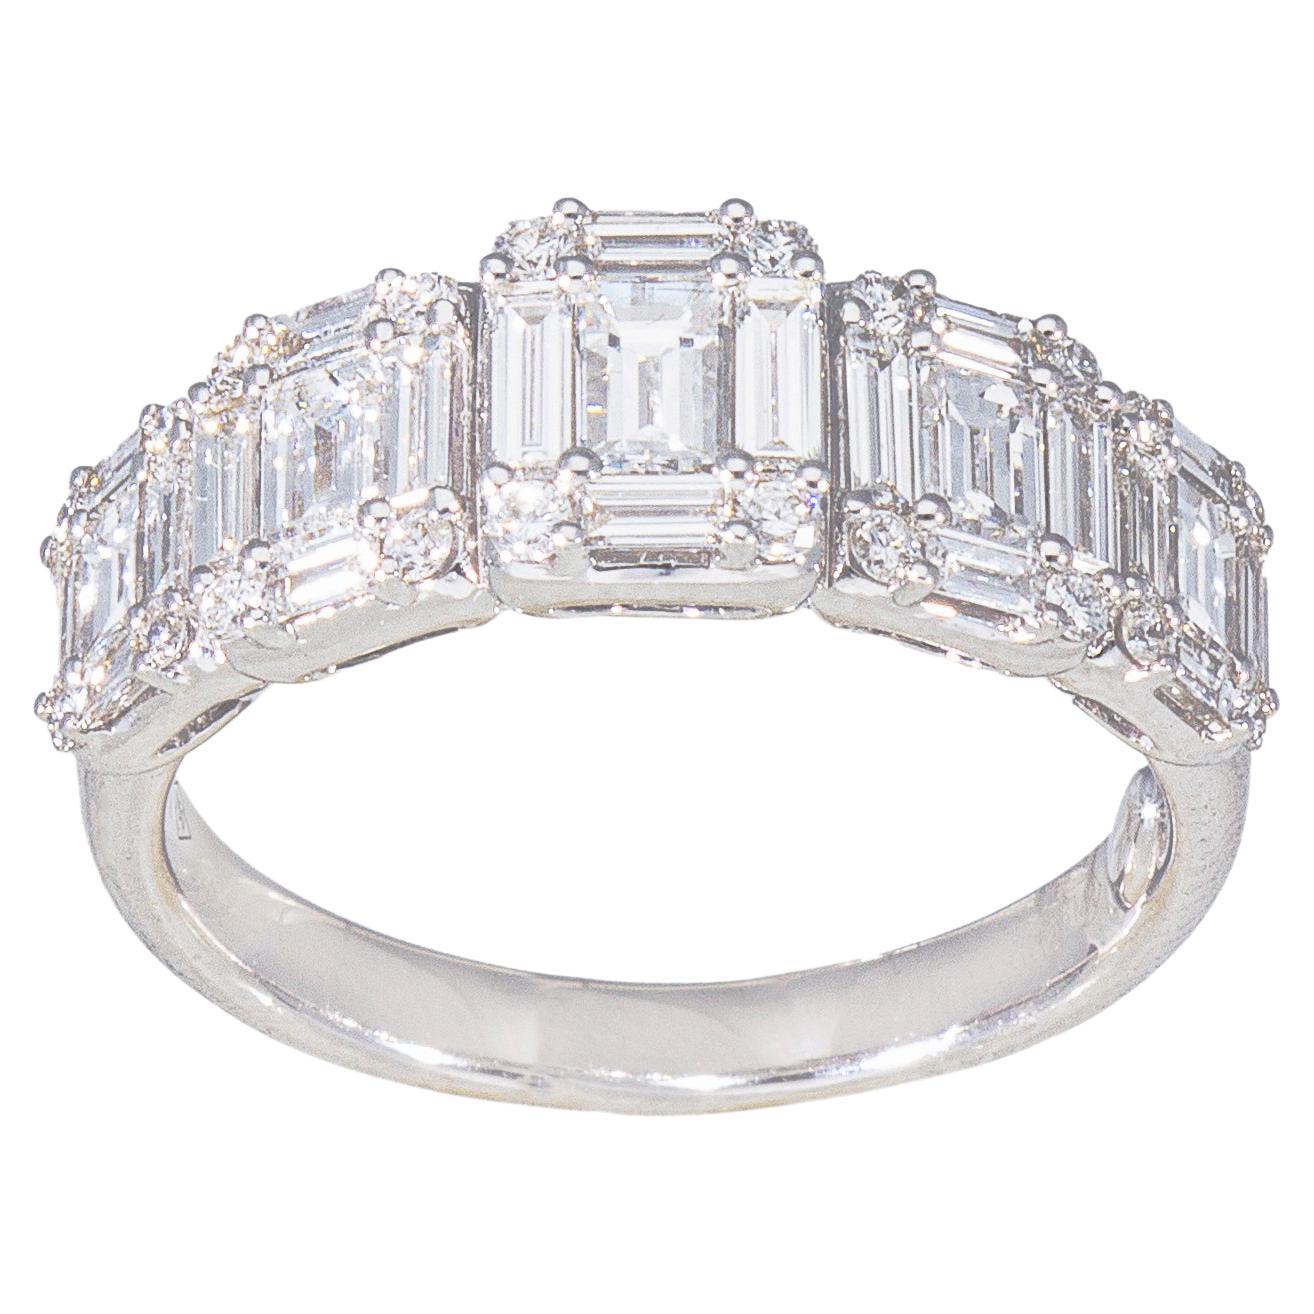 Band Engagement Ring Ct 1.47 of Brilliant and Baguette Cut Diamonds